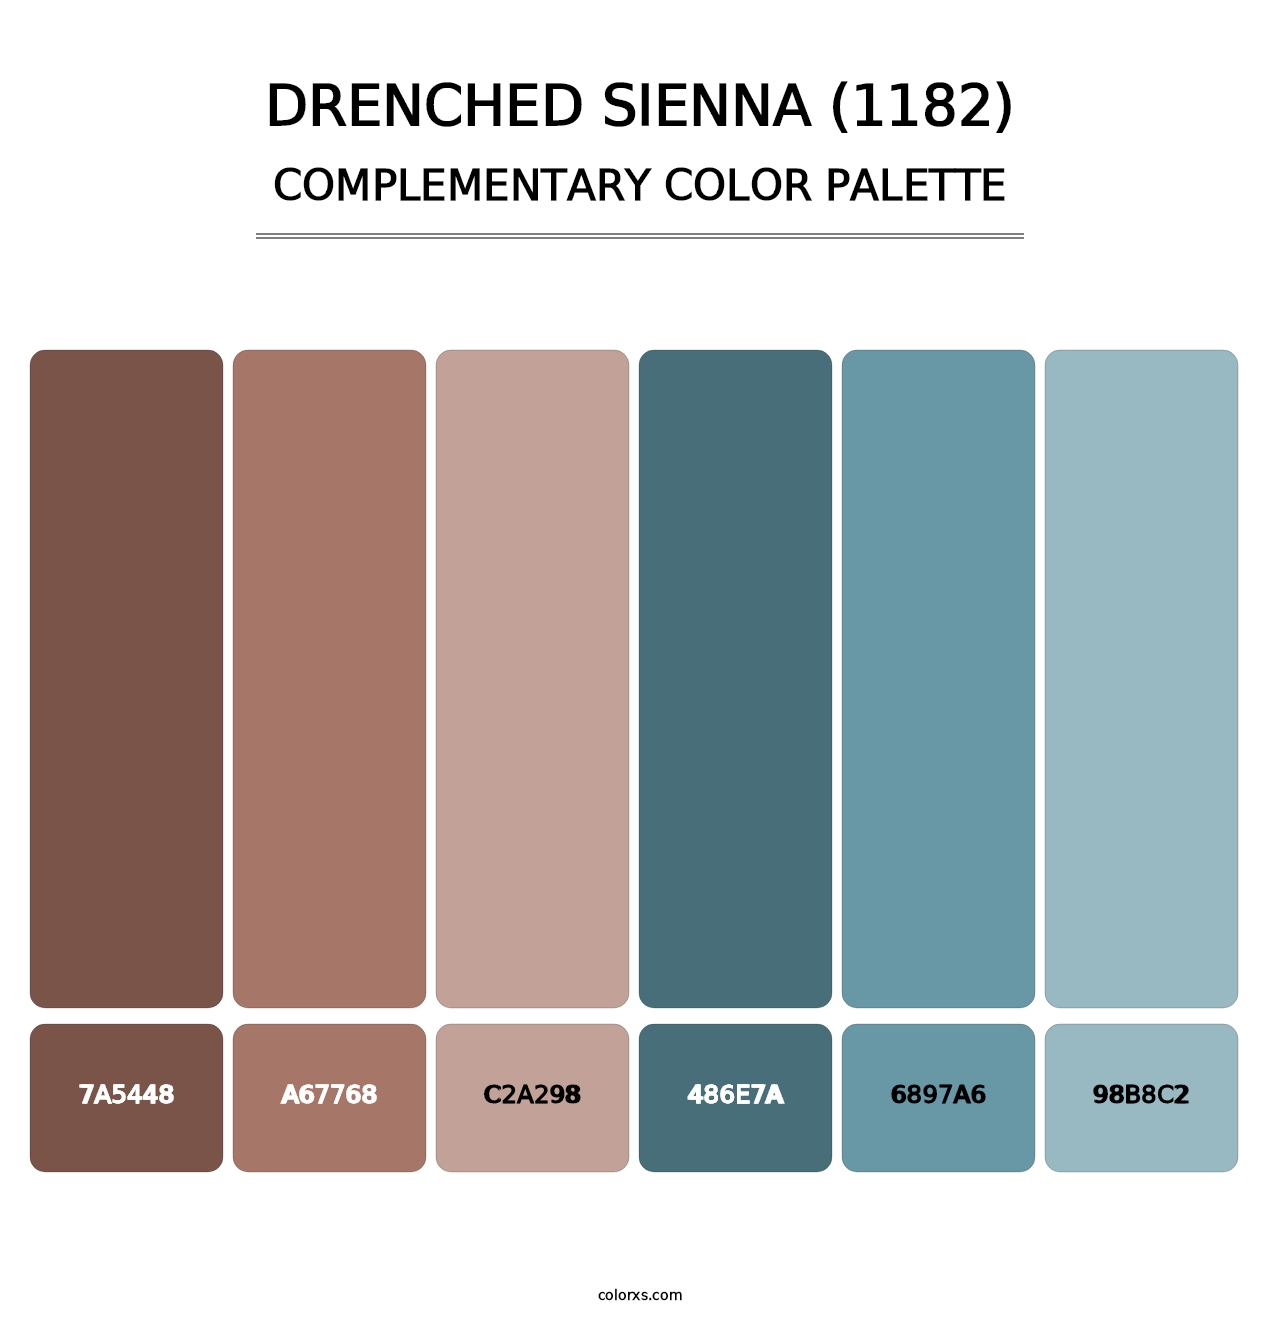 Drenched Sienna (1182) - Complementary Color Palette